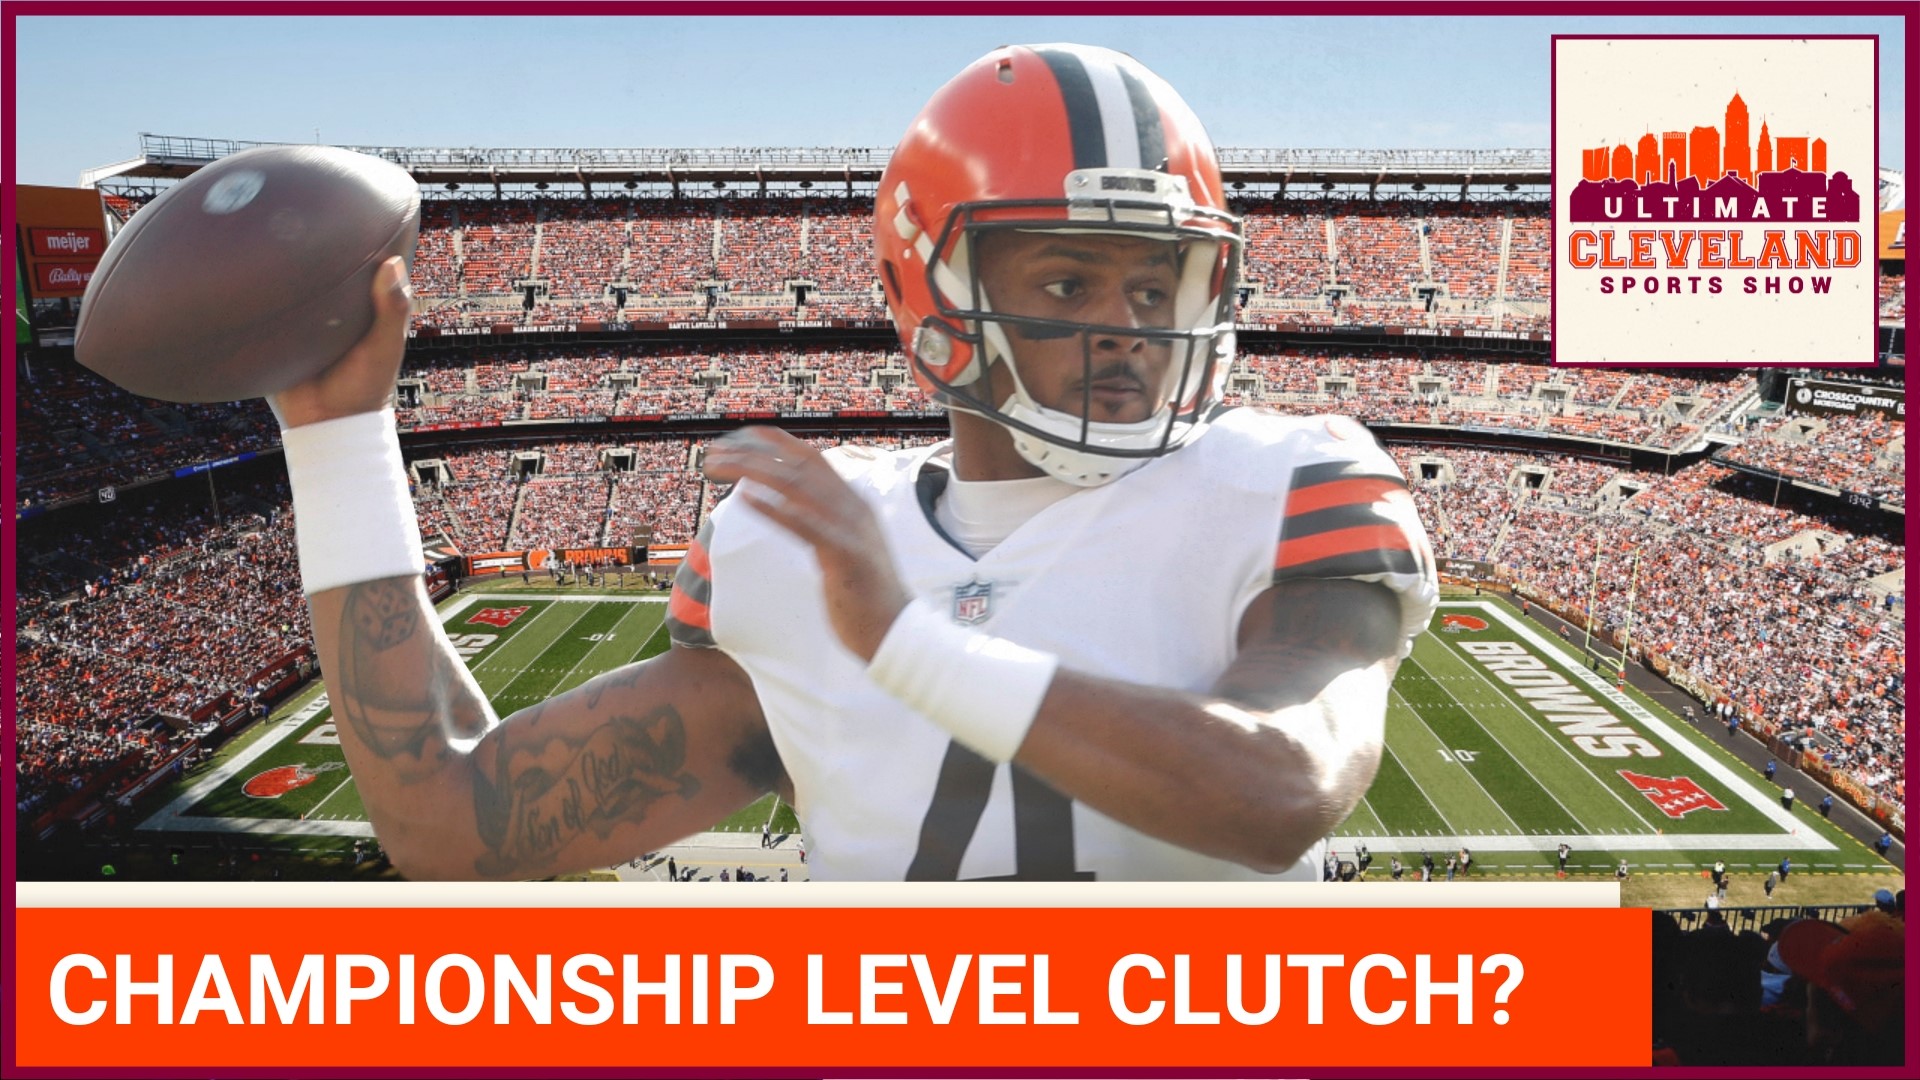 Is Deshaun Watson's clutch factor what will keep the Cleveland Browns championship window open for as long as he plays?